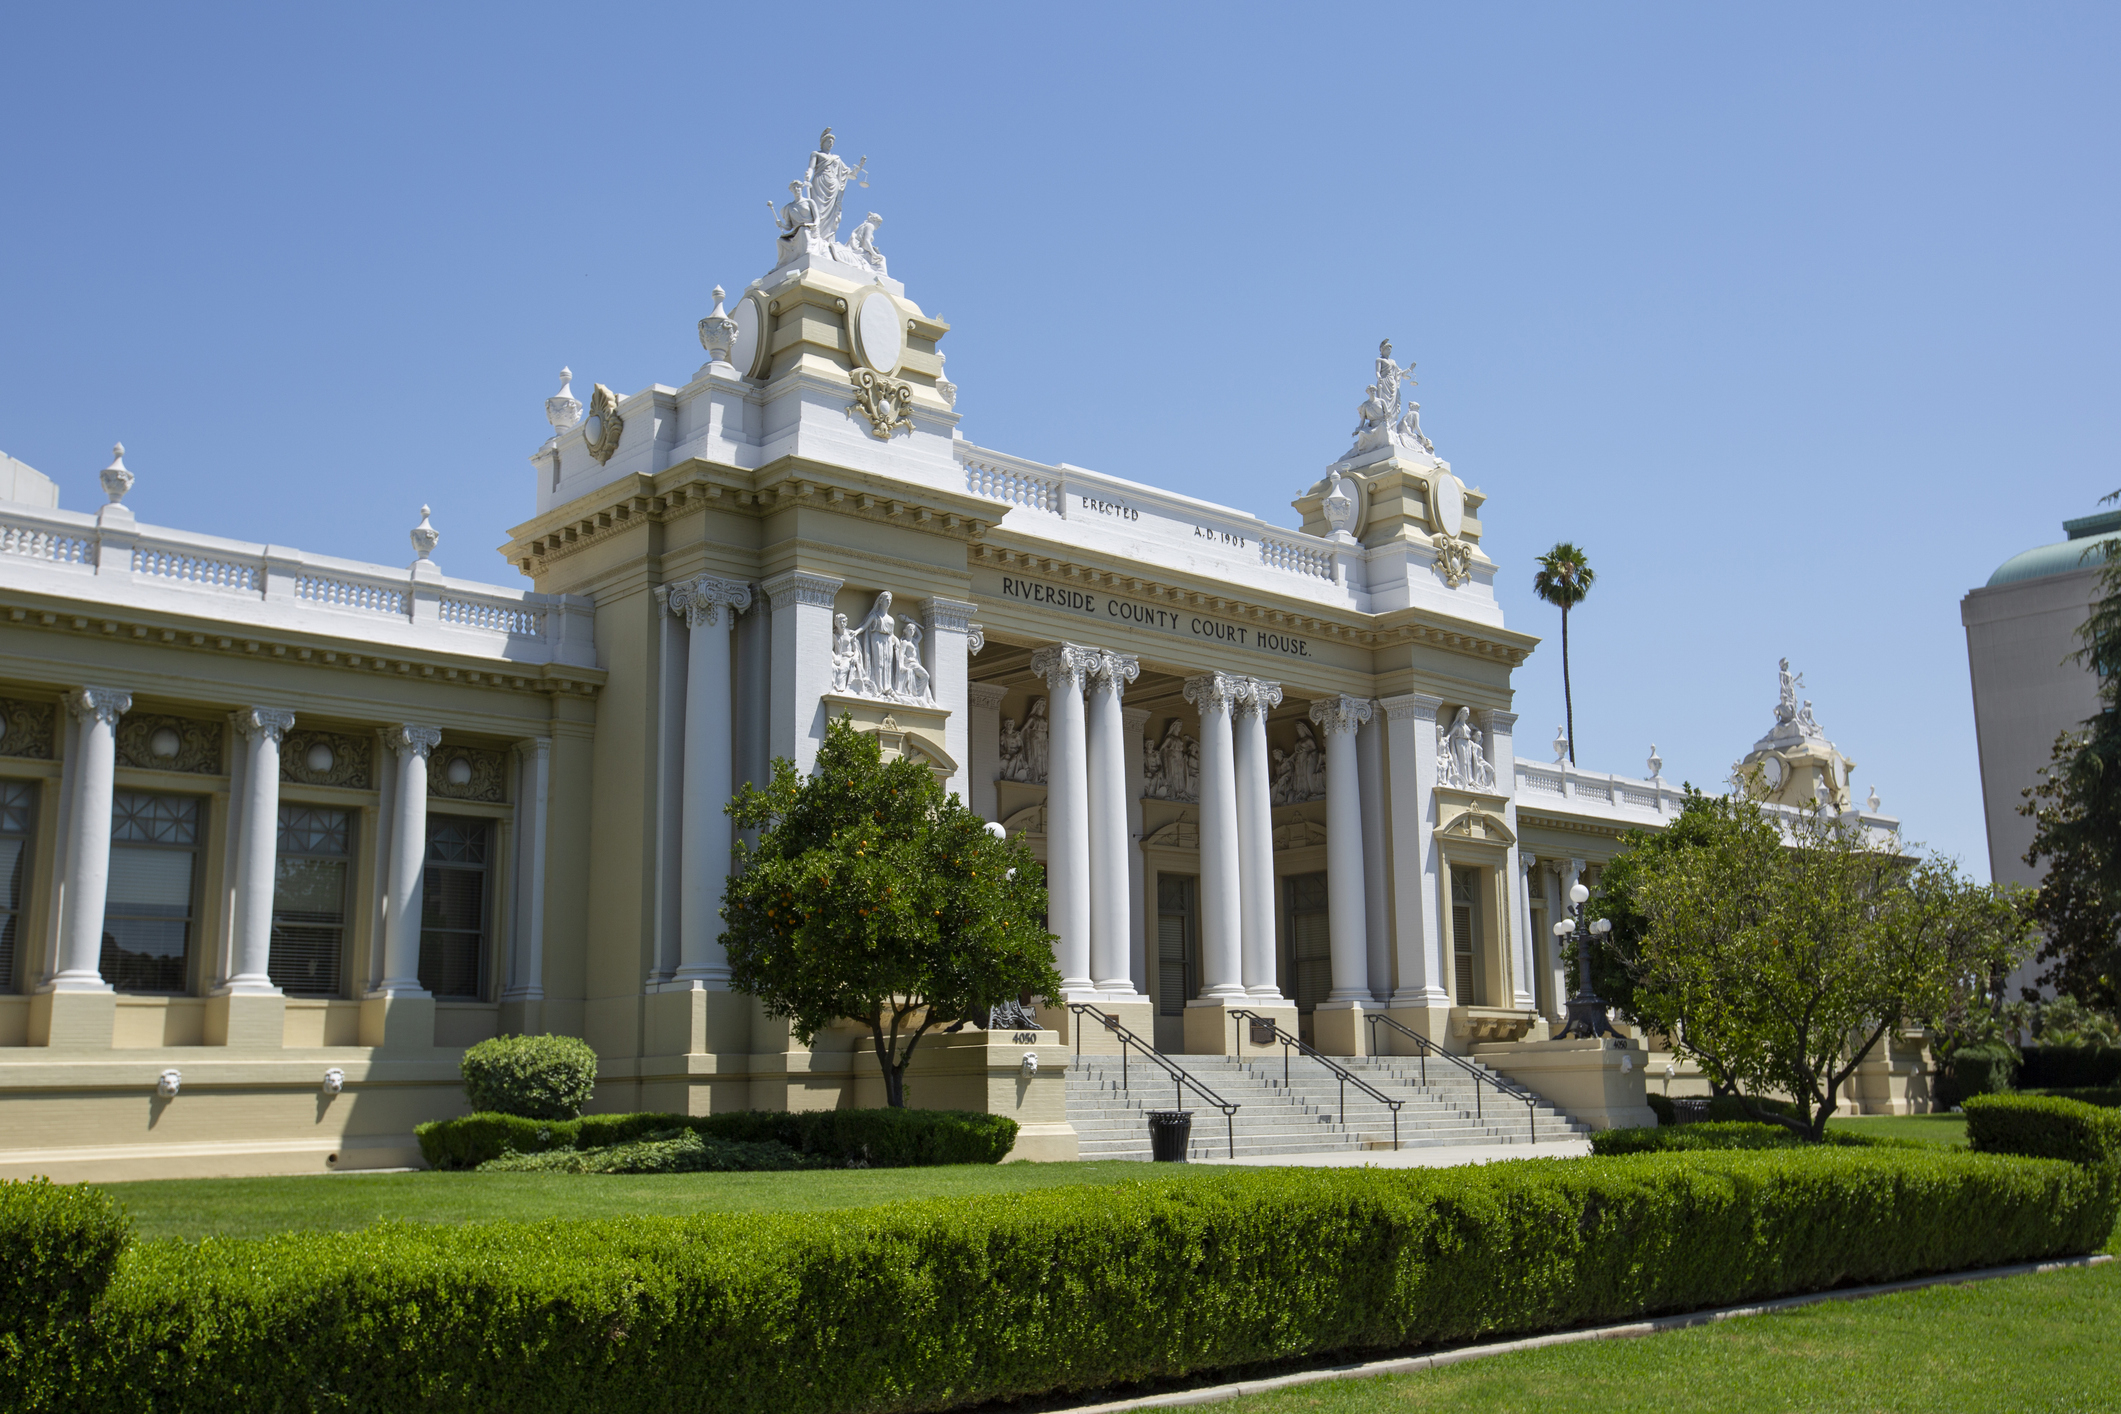 Neoclassical building with columns and sculptures atop its facade, flanked by greenery under a clear sky